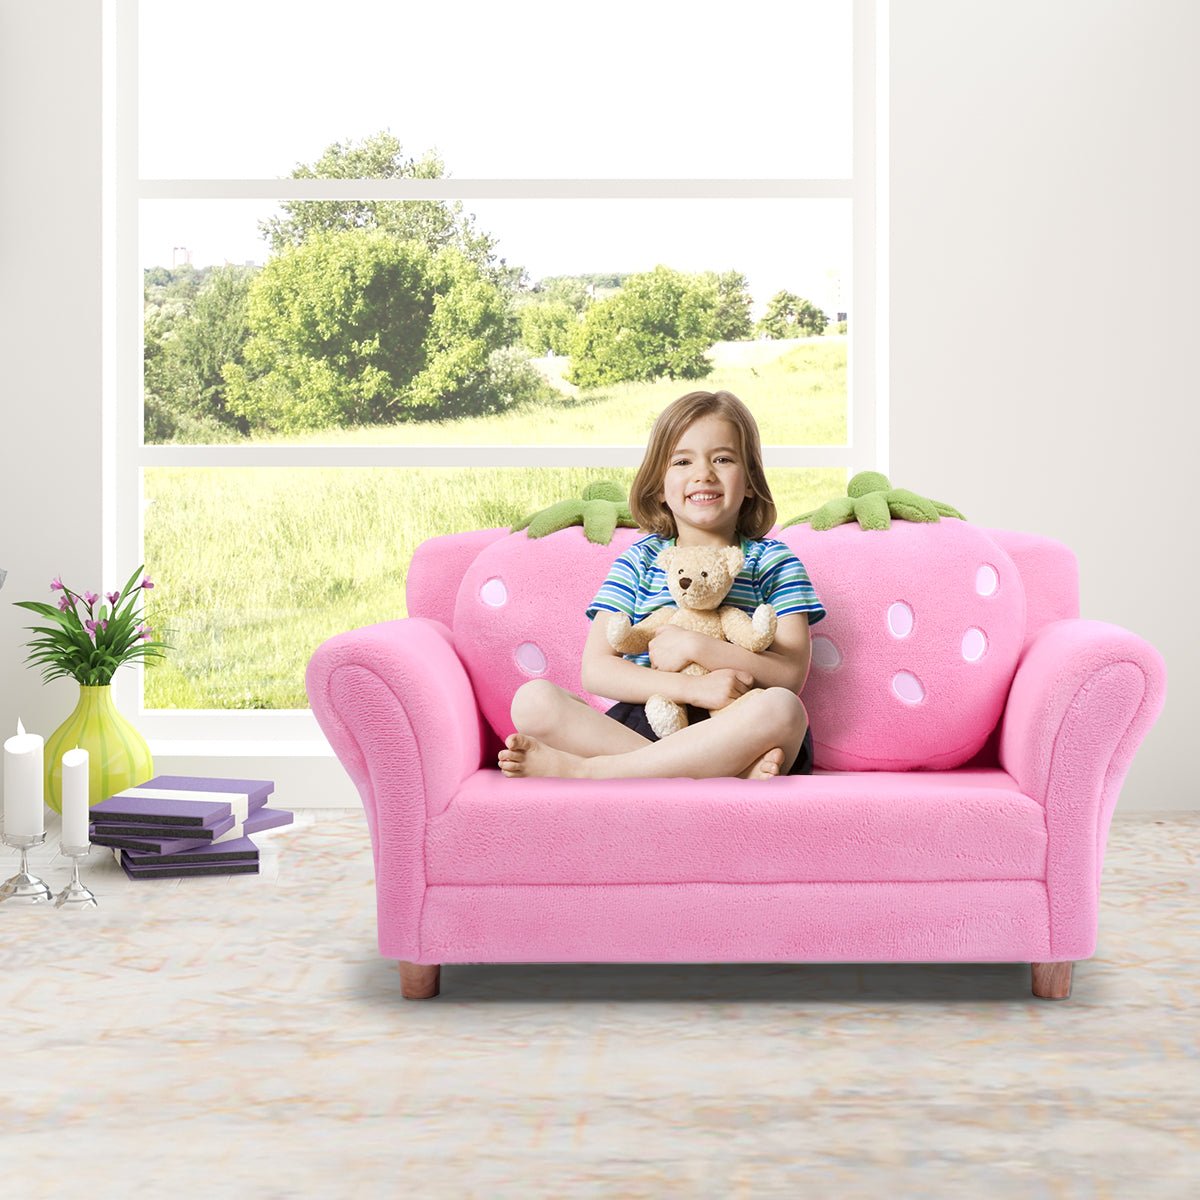 Children's 2-Seat Sofa: Lounge Bed with Whimsical Strawberry Pillows